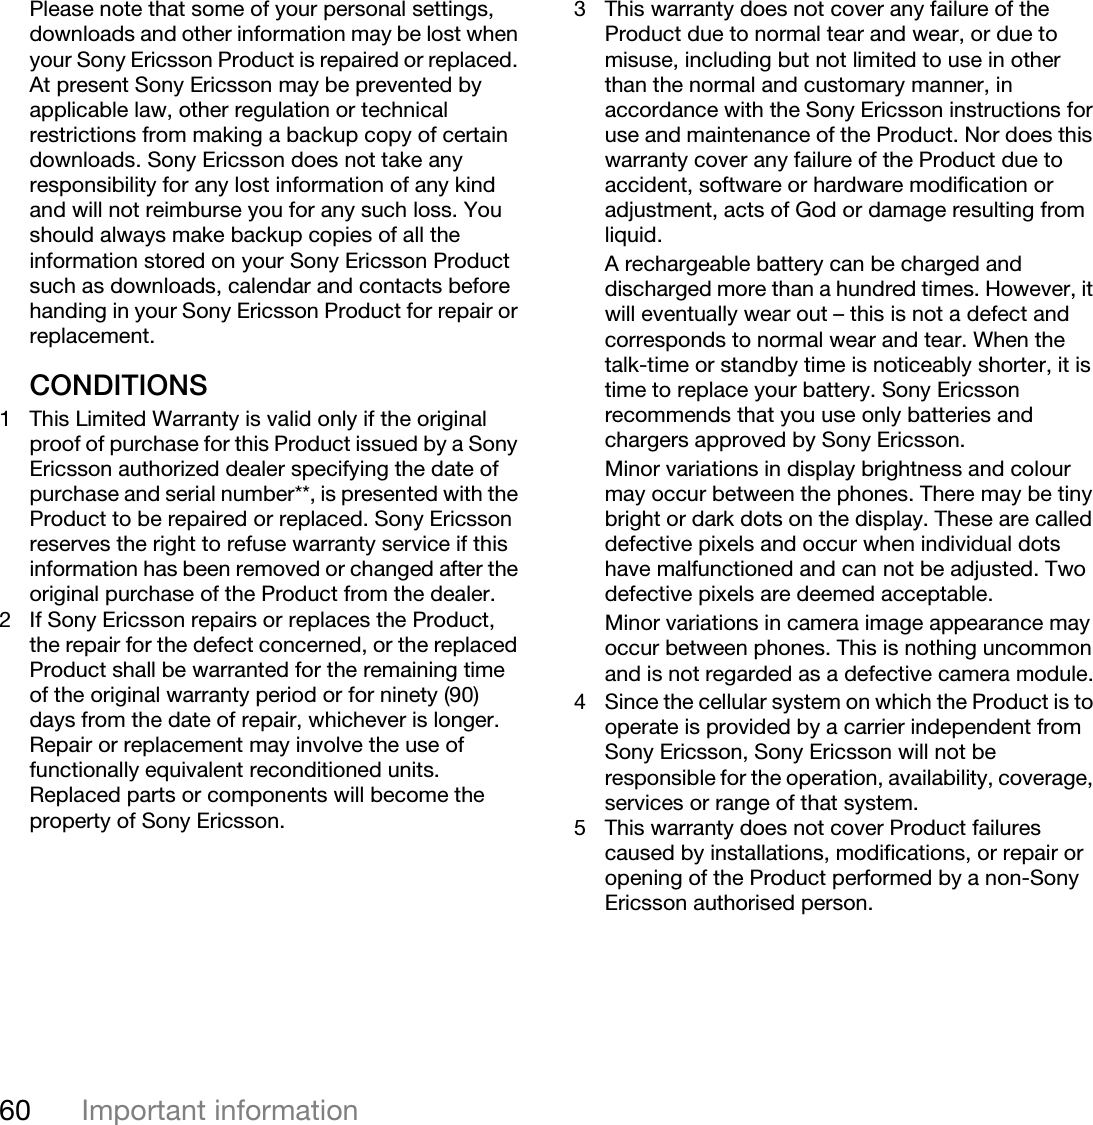 60 Important informationThis is the Internet version of the user&apos;s guide. © Print only for private use.Please note that some of your personal settings, downloads and other information may be lost when your Sony Ericsson Product is repaired or replaced. At present Sony Ericsson may be prevented by applicable law, other regulation or technical restrictions from making a backup copy of certain downloads. Sony Ericsson does not take any responsibility for any lost information of any kind and will not reimburse you for any such loss. You should always make backup copies of all the information stored on your Sony Ericsson Product such as downloads, calendar and contacts before handing in your Sony Ericsson Product for repair or replacement.CONDITIONS1 This Limited Warranty is valid only if the original proof of purchase for this Product issued by a Sony Ericsson authorized dealer specifying the date of purchase and serial number**, is presented with the Product to be repaired or replaced. Sony Ericsson reserves the right to refuse warranty service if this information has been removed or changed after the original purchase of the Product from the dealer. 2 If Sony Ericsson repairs or replaces the Product, the repair for the defect concerned, or the replaced Product shall be warranted for the remaining time of the original warranty period or for ninety (90) days from the date of repair, whichever is longer. Repair or replacement may involve the use of functionally equivalent reconditioned units. Replaced parts or components will become the property of Sony Ericsson.3 This warranty does not cover any failure of the Product due to normal tear and wear, or due to misuse, including but not limited to use in other than the normal and customary manner, in accordance with the Sony Ericsson instructions for use and maintenance of the Product. Nor does this warranty cover any failure of the Product due to accident, software or hardware modification or adjustment, acts of God or damage resulting from liquid.A rechargeable battery can be charged and discharged more than a hundred times. However, it will eventually wear out – this is not a defect and corresponds to normal wear and tear. When the talk-time or standby time is noticeably shorter, it is time to replace your battery. Sony Ericsson recommends that you use only batteries and chargers approved by Sony Ericsson.Minor variations in display brightness and colour may occur between the phones. There may be tiny bright or dark dots on the display. These are called defective pixels and occur when individual dots have malfunctioned and can not be adjusted. Two defective pixels are deemed acceptable.Minor variations in camera image appearance may occur between phones. This is nothing uncommon and is not regarded as a defective camera module.4 Since the cellular system on which the Product is to operate is provided by a carrier independent from Sony Ericsson, Sony Ericsson will not be responsible for the operation, availability, coverage, services or range of that system.5 This warranty does not cover Product failures caused by installations, modifications, or repair or opening of the Product performed by a non-Sony Ericsson authorised person.